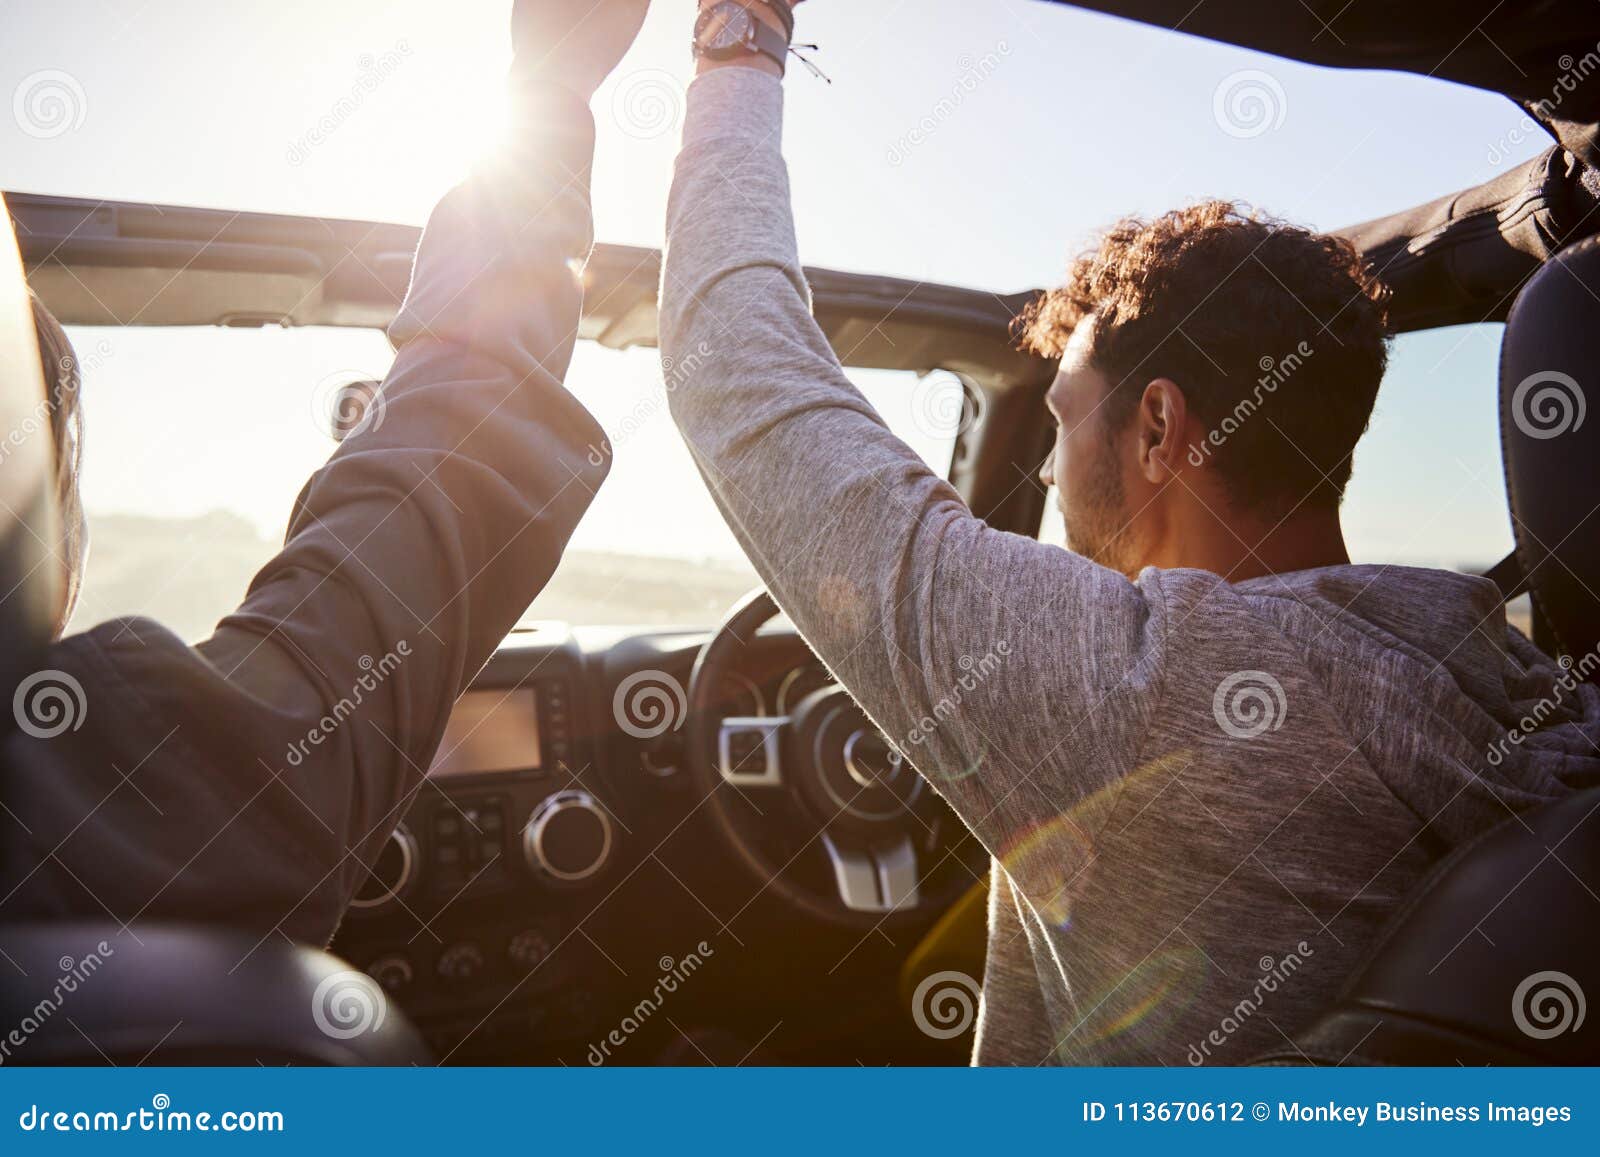 young couple driving with sunroof open and hands in the air